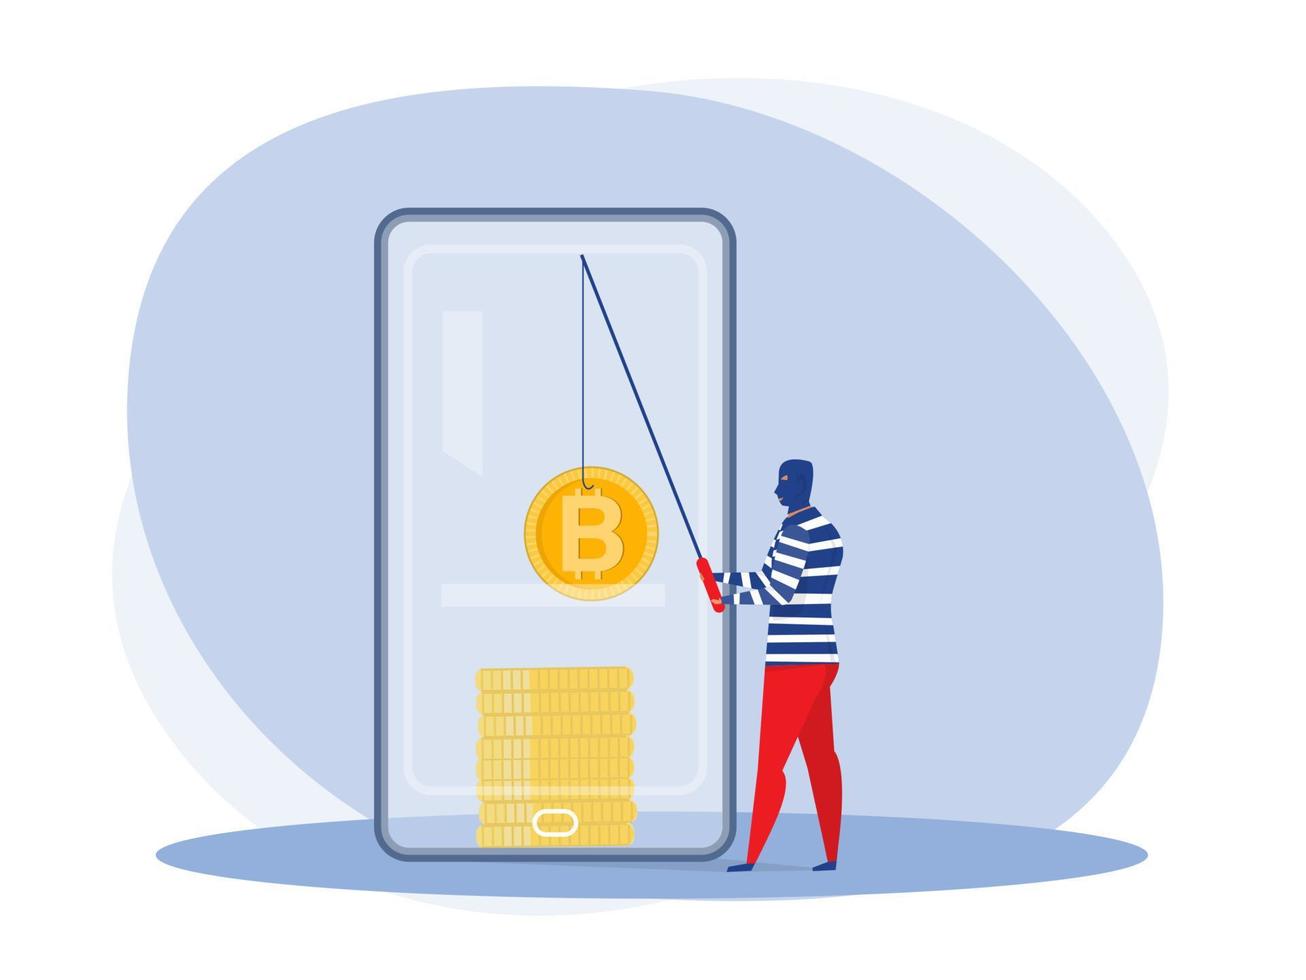 Cyber hacker fishing up bitcoin  from a mobile phone  attack concept vector illustrator.